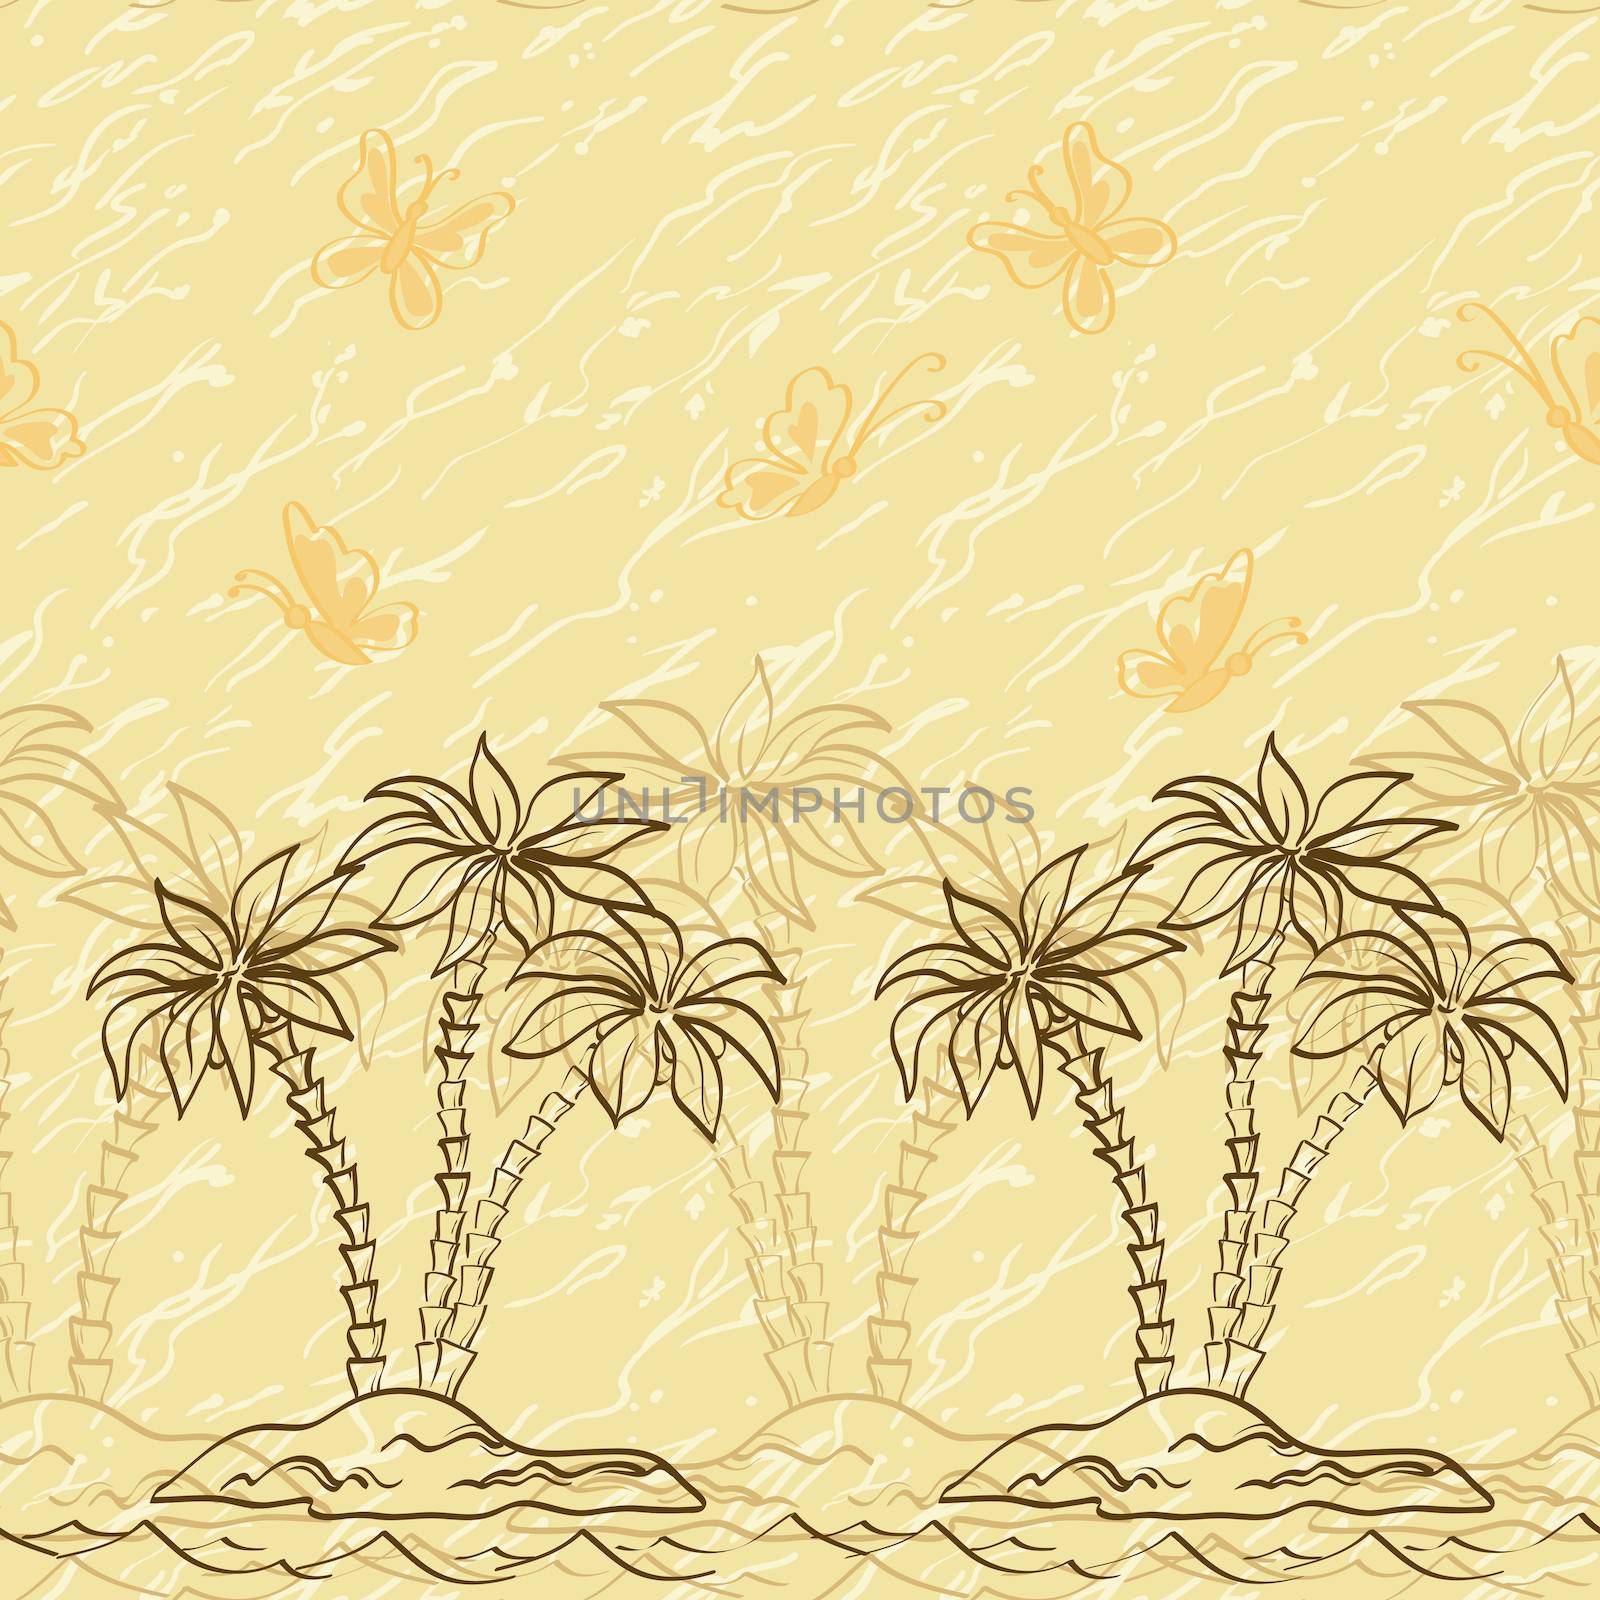 Seamless background, palm trees and butterflies contours and abstract pattern.